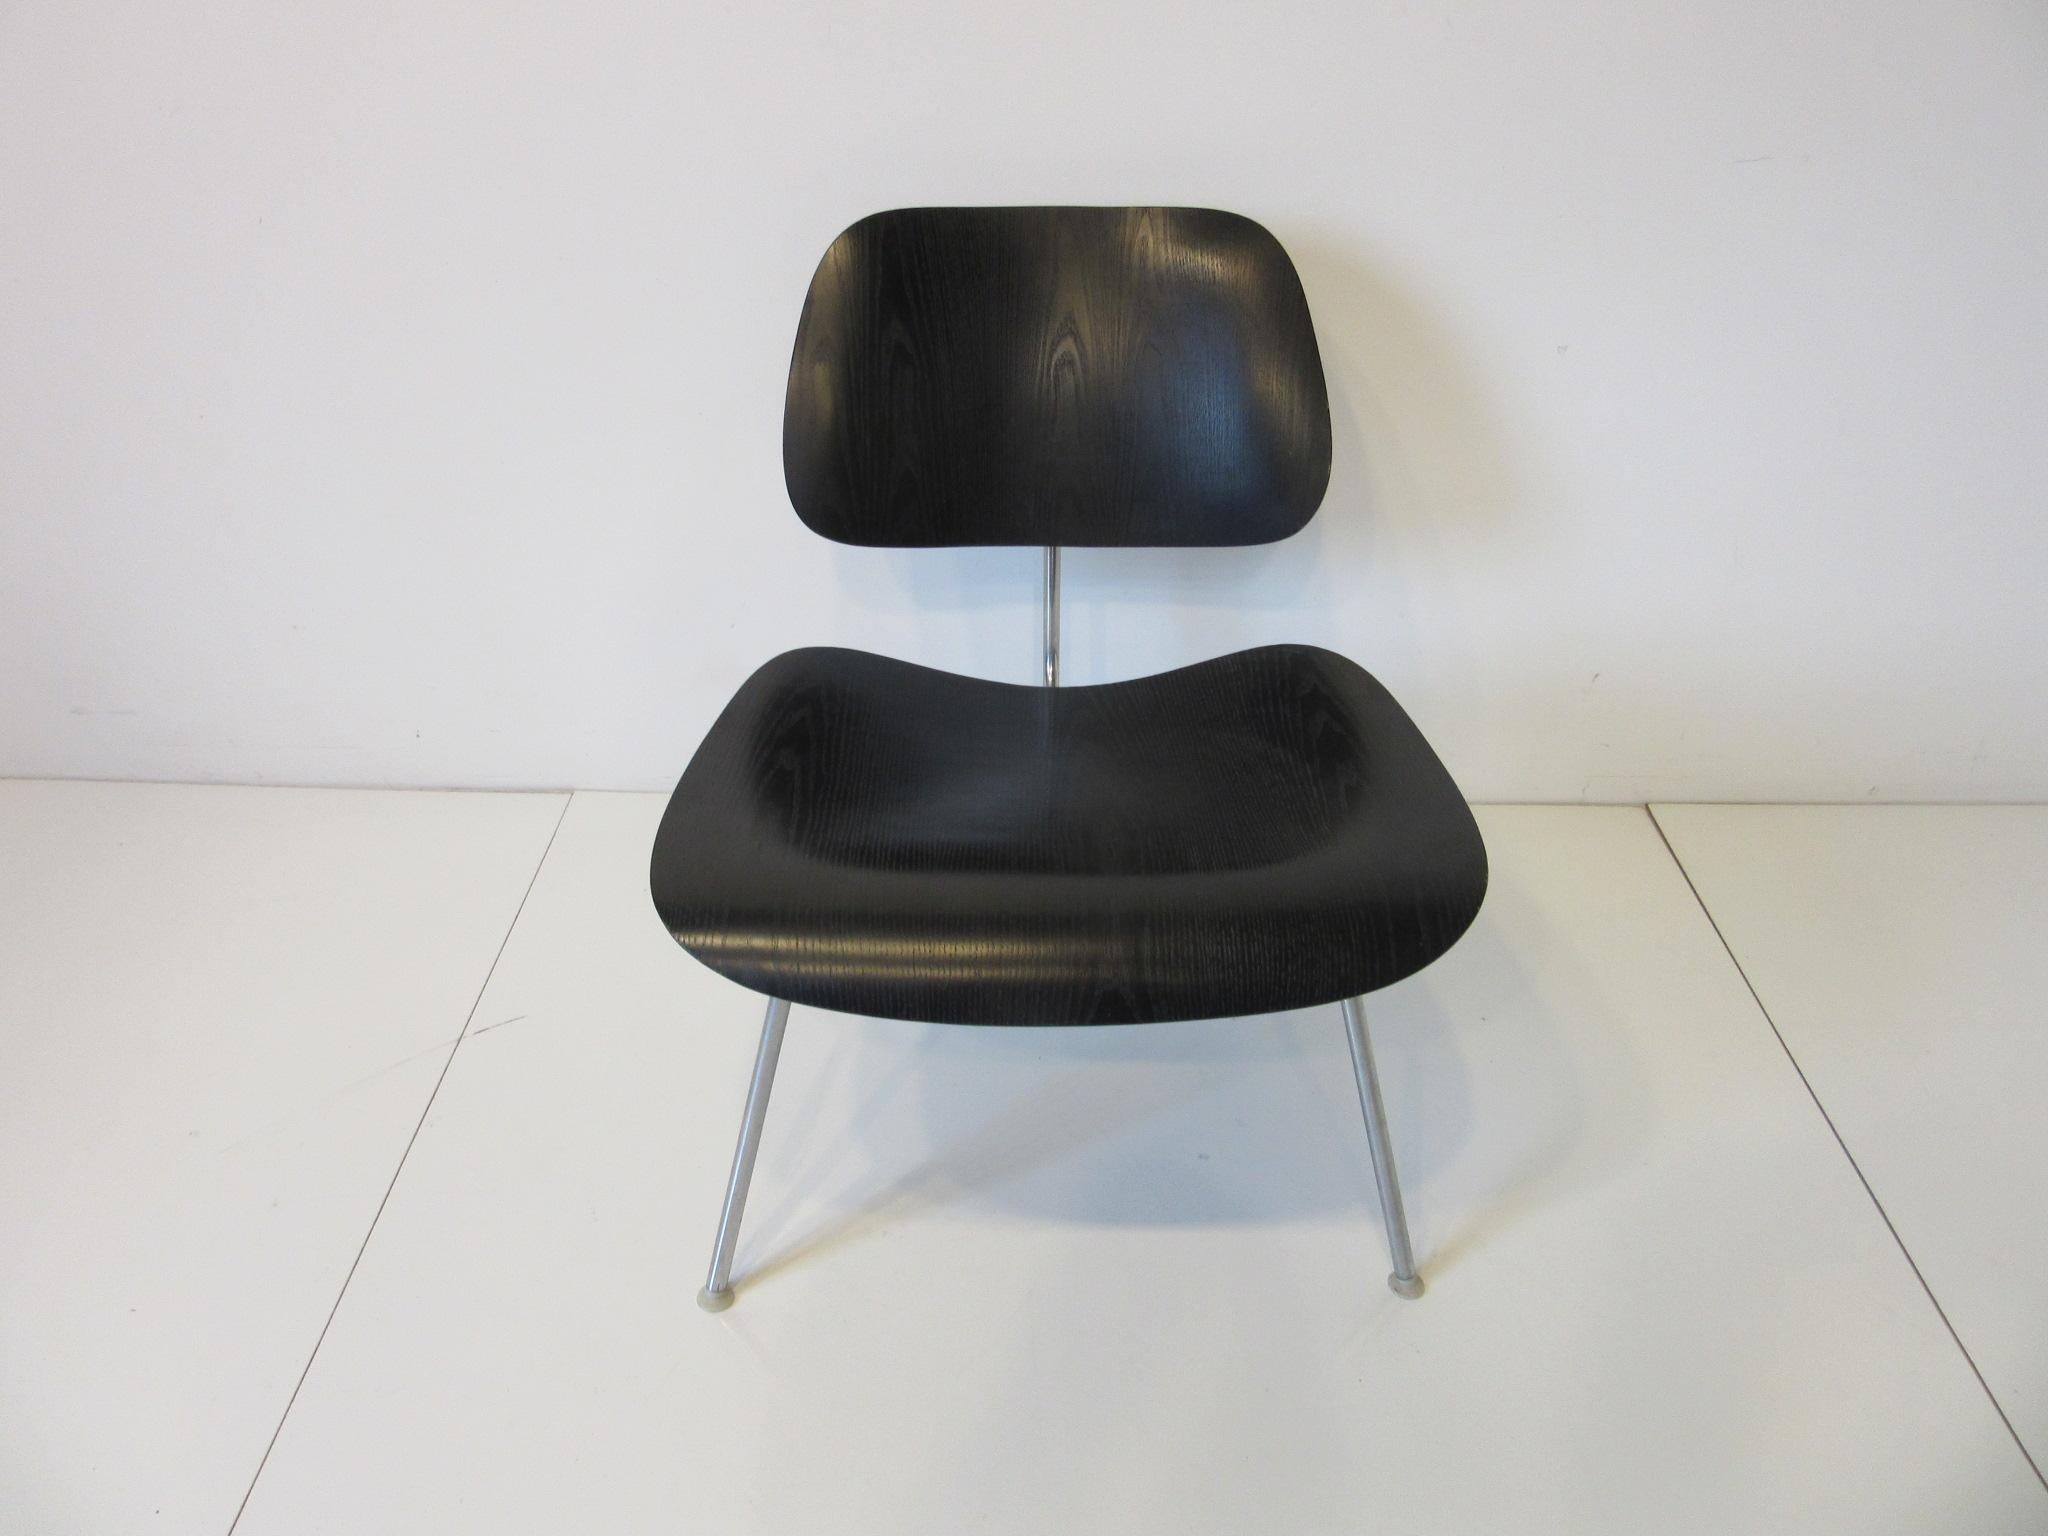 20th Century Eames LCM Plywood Low Lounge Chair by Herman Miller